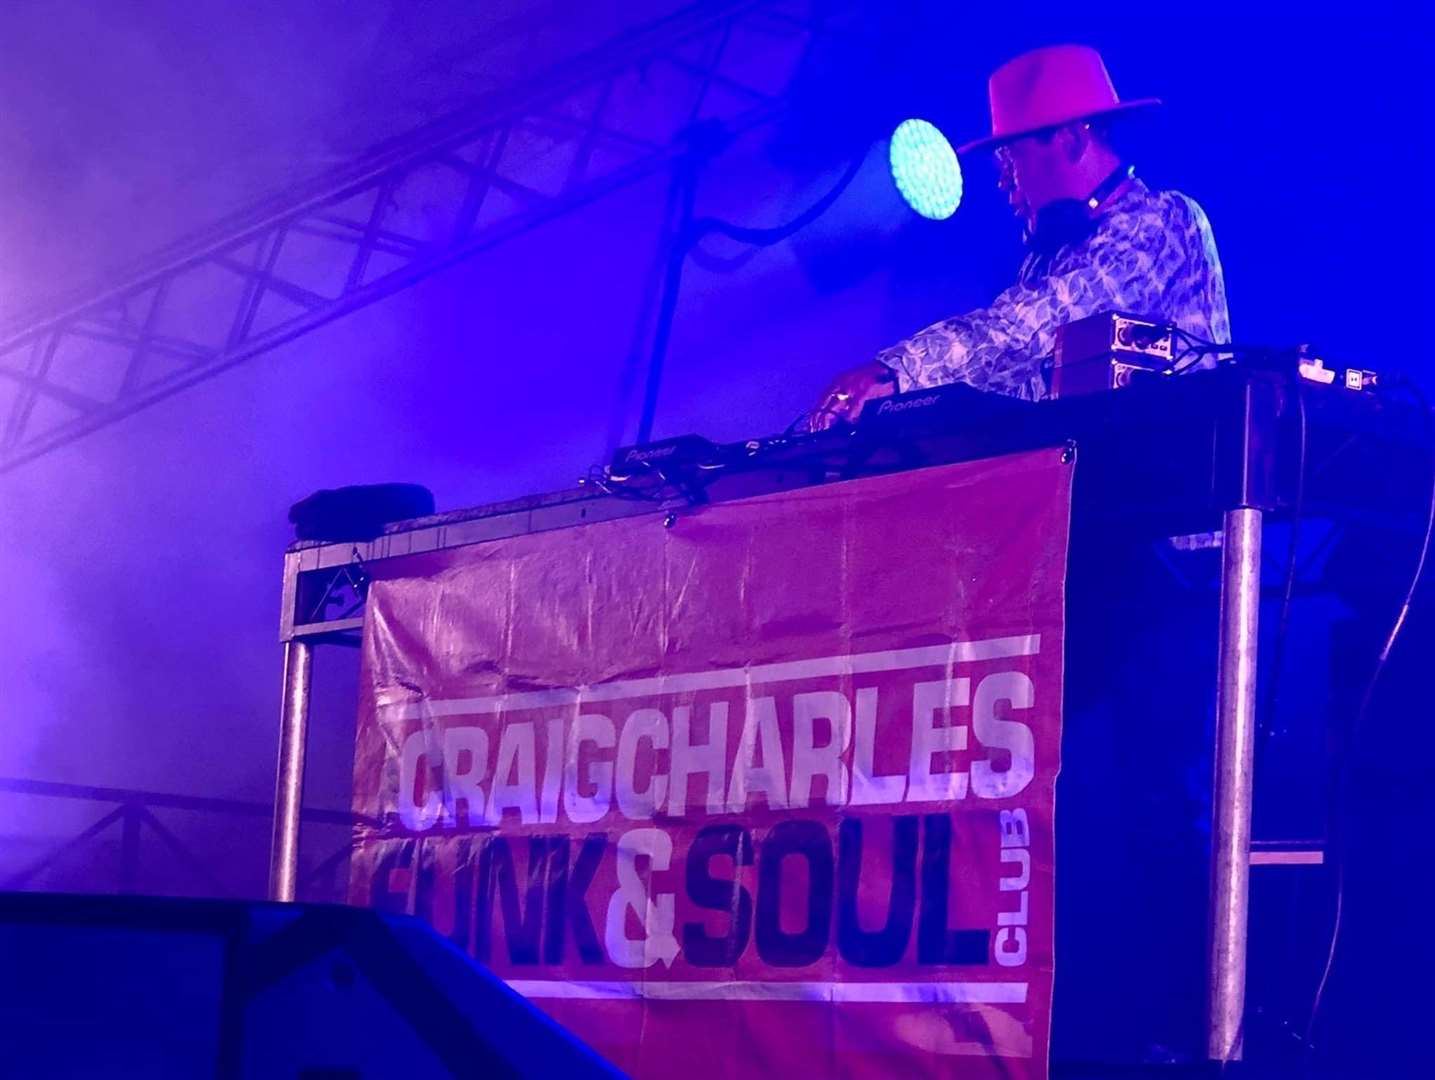 Former Red Dwarf star Craig Charles has been announced for the Soundcrash Funk and Soul Weekender next year